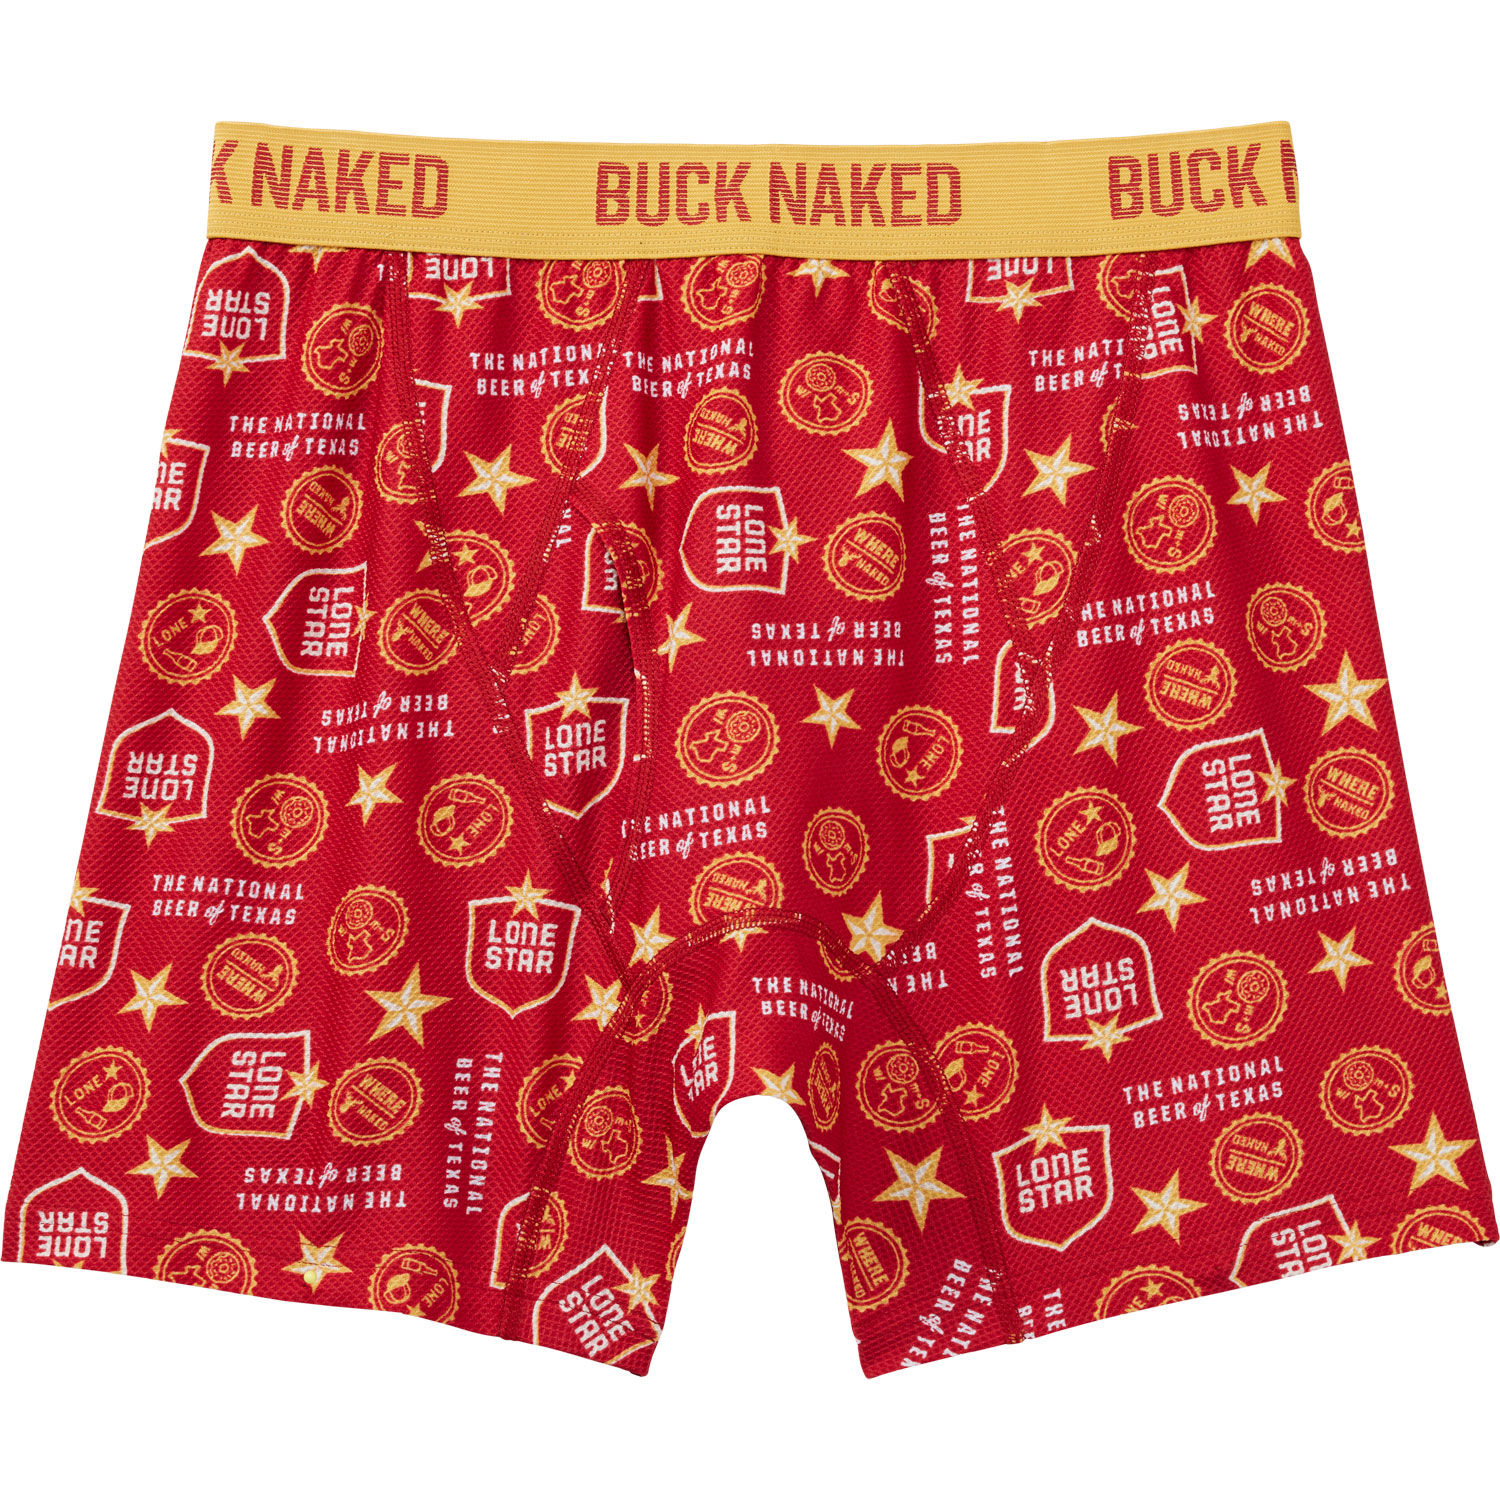 Men's Buck Naked Collaboration Print Boxer Briefs | Duluth Trading Company